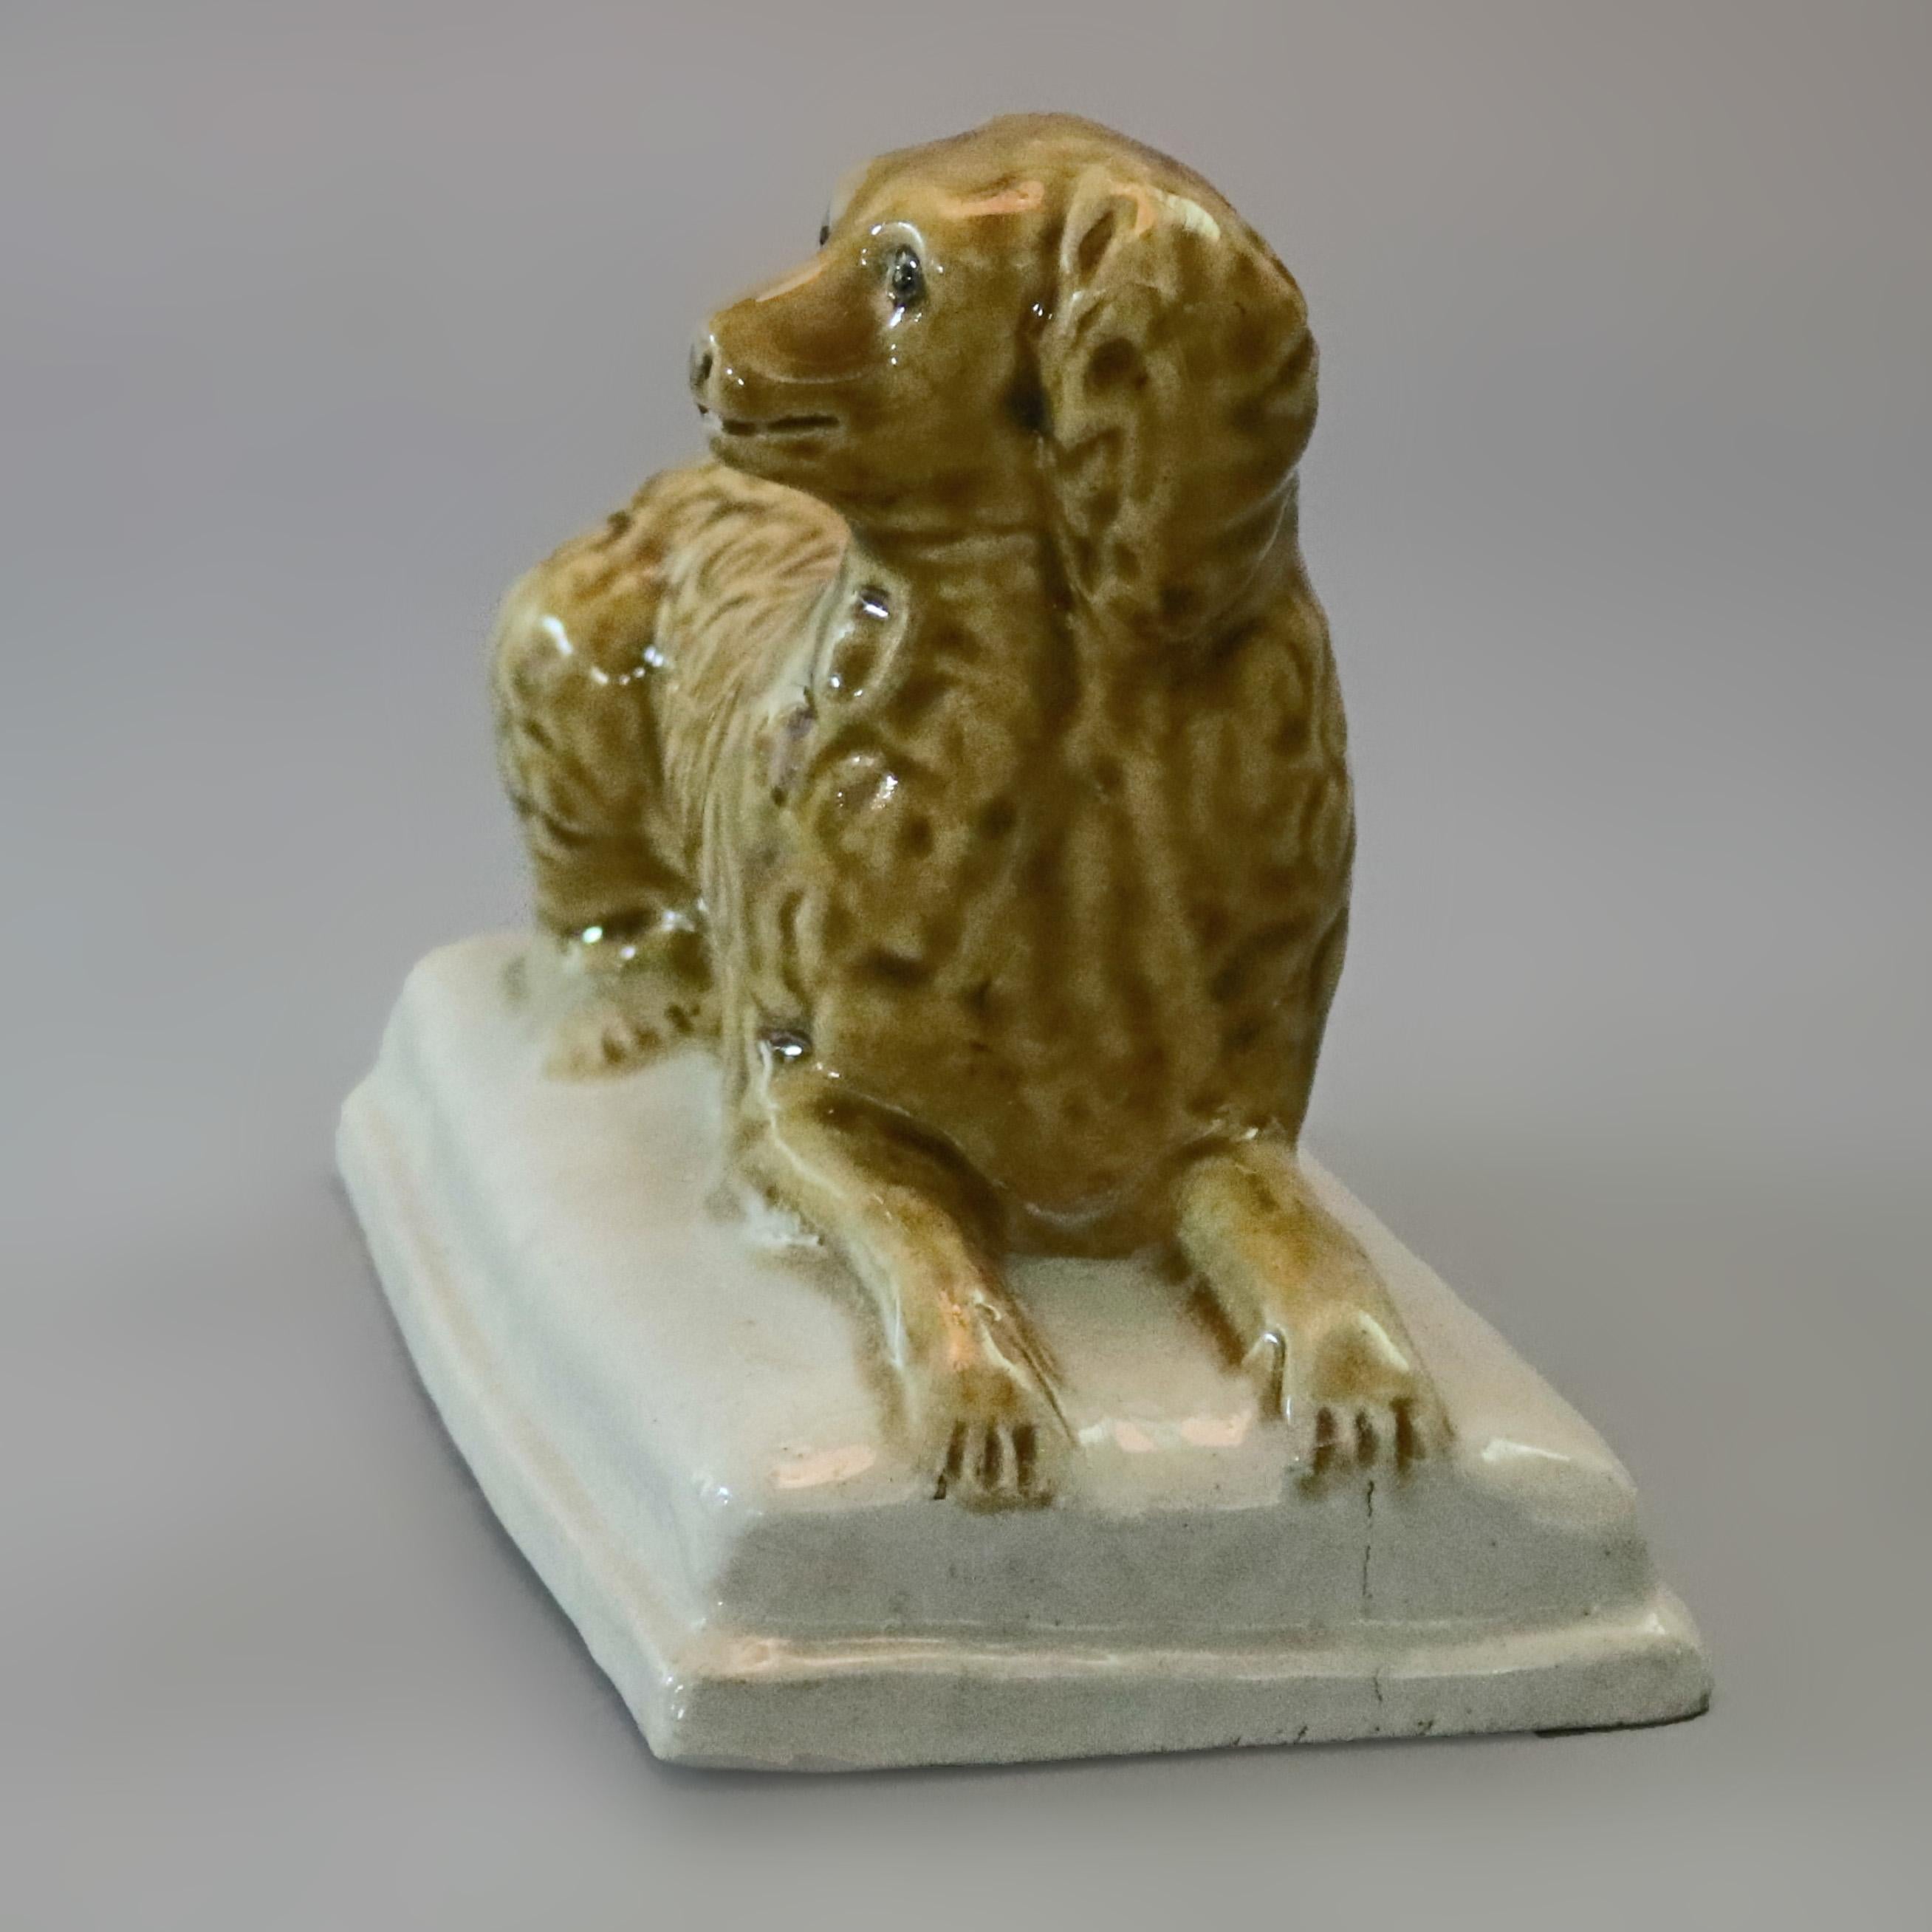 An antique glazed stoneware (possibly yellow ware) canine sculpture depicts recumbent dog on base, reminiscent of the Irish Water Spaniel and later Staffordshire, circa 1850

Measures - 5.5